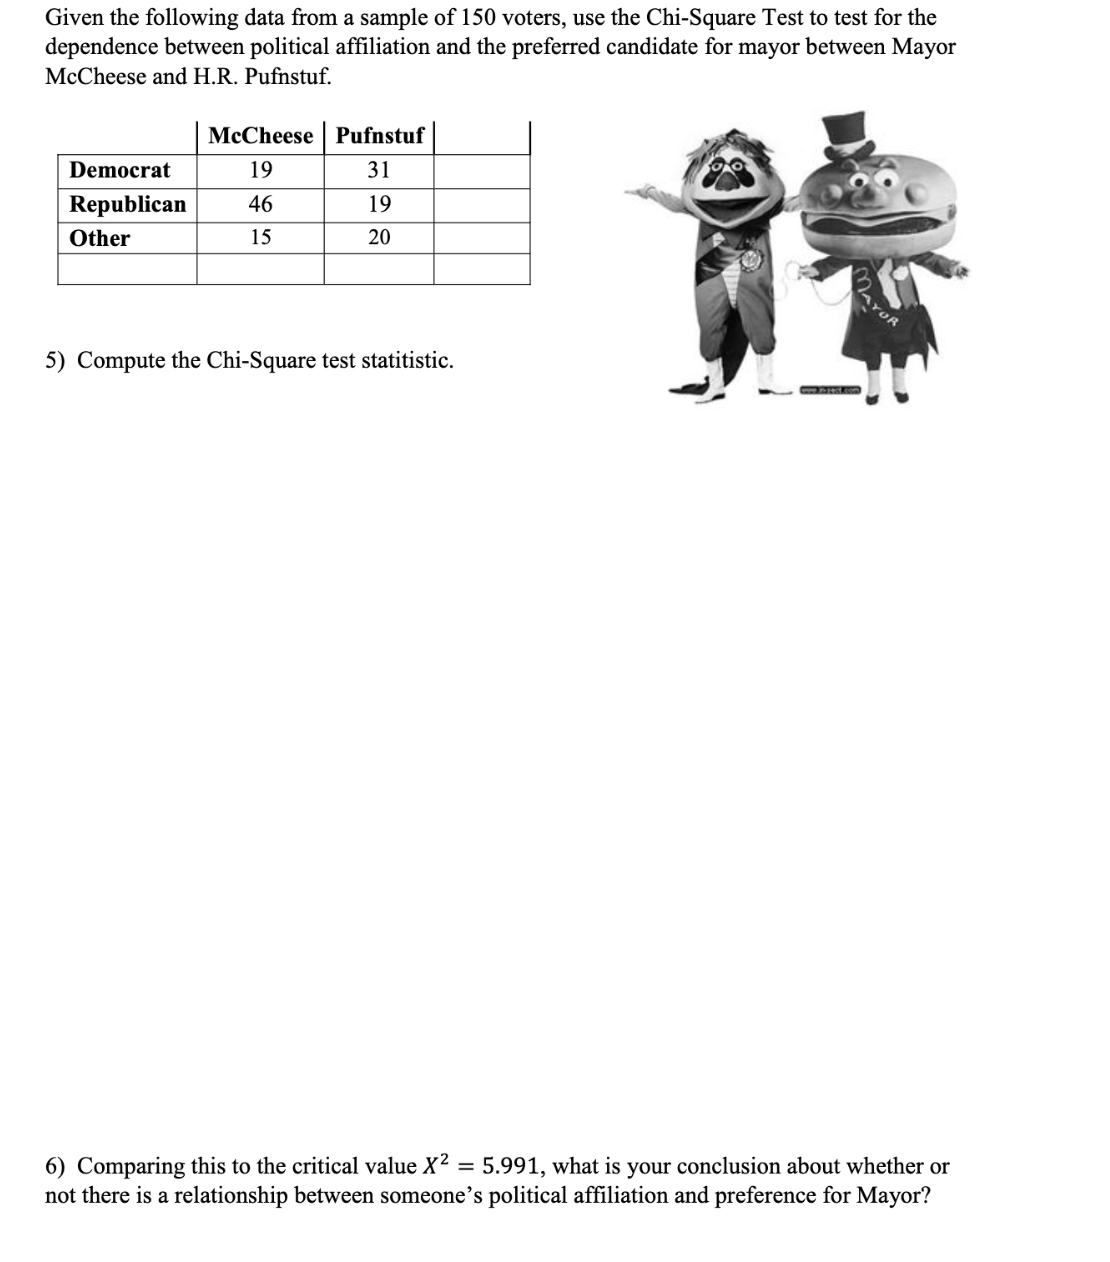 Given the following data from a sample of 150 voters, use the Chi-Square Test to test for the
dependence between political affiliation and the preferred candidate for mayor between Mayor
McCheese and H.R. Pufnstuf.
McCheese
Democrat
19
Republican 46
Other
15
Pufnstuf
31
19
20
5) Compute the Chi-Square test statitistic.
=
6) Comparing this to the critical value X²
5.991, what is your conclusion about whether or
not there is a relationship between someone's political affiliation and preference for Mayor?